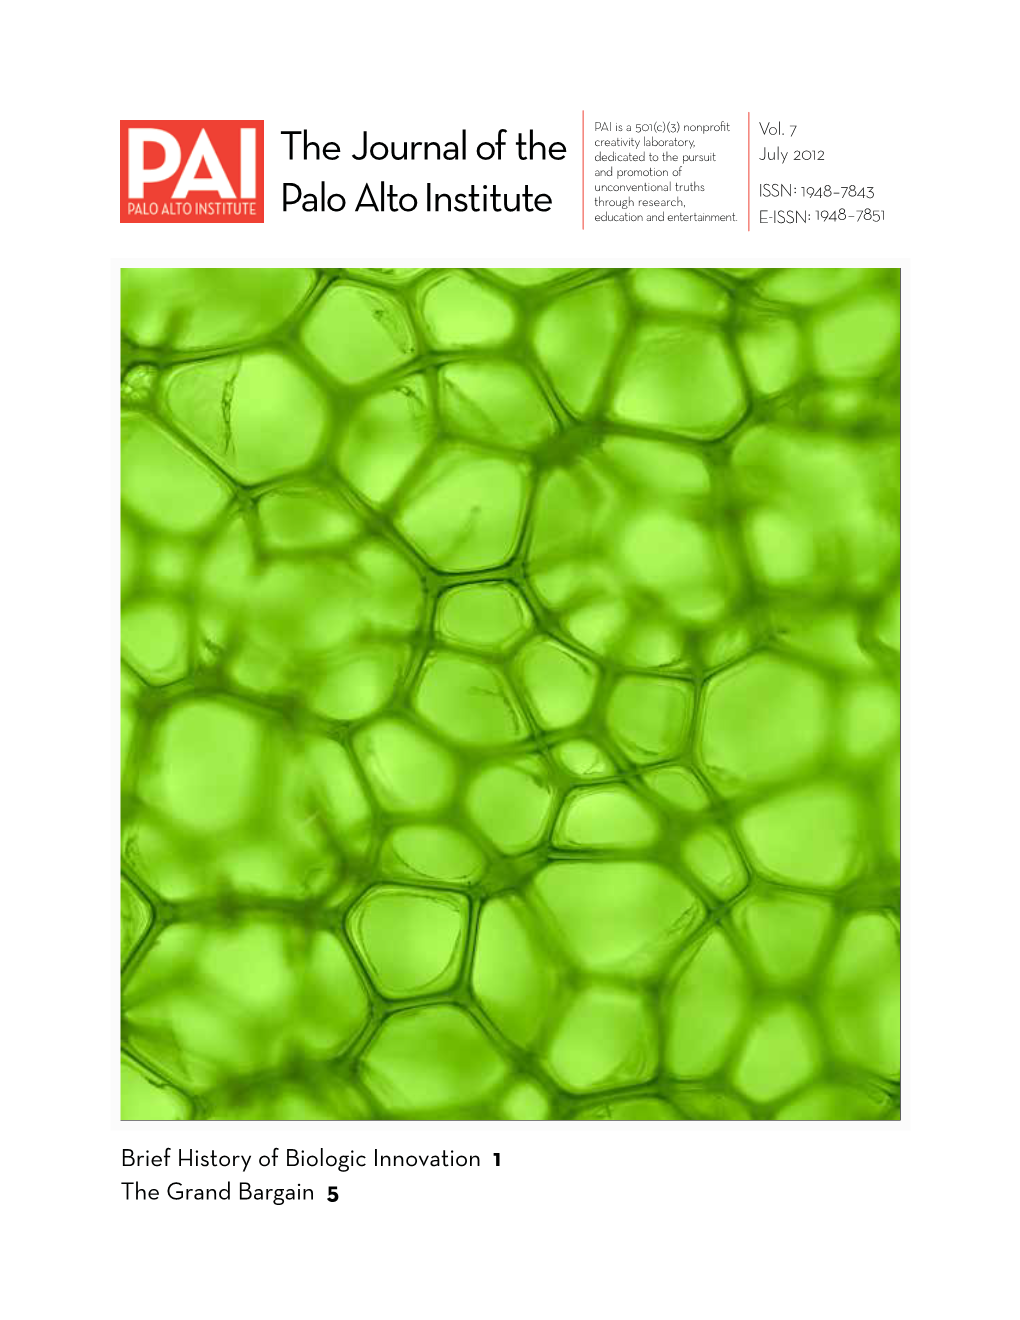 The Journal of the Palo Alto Institute